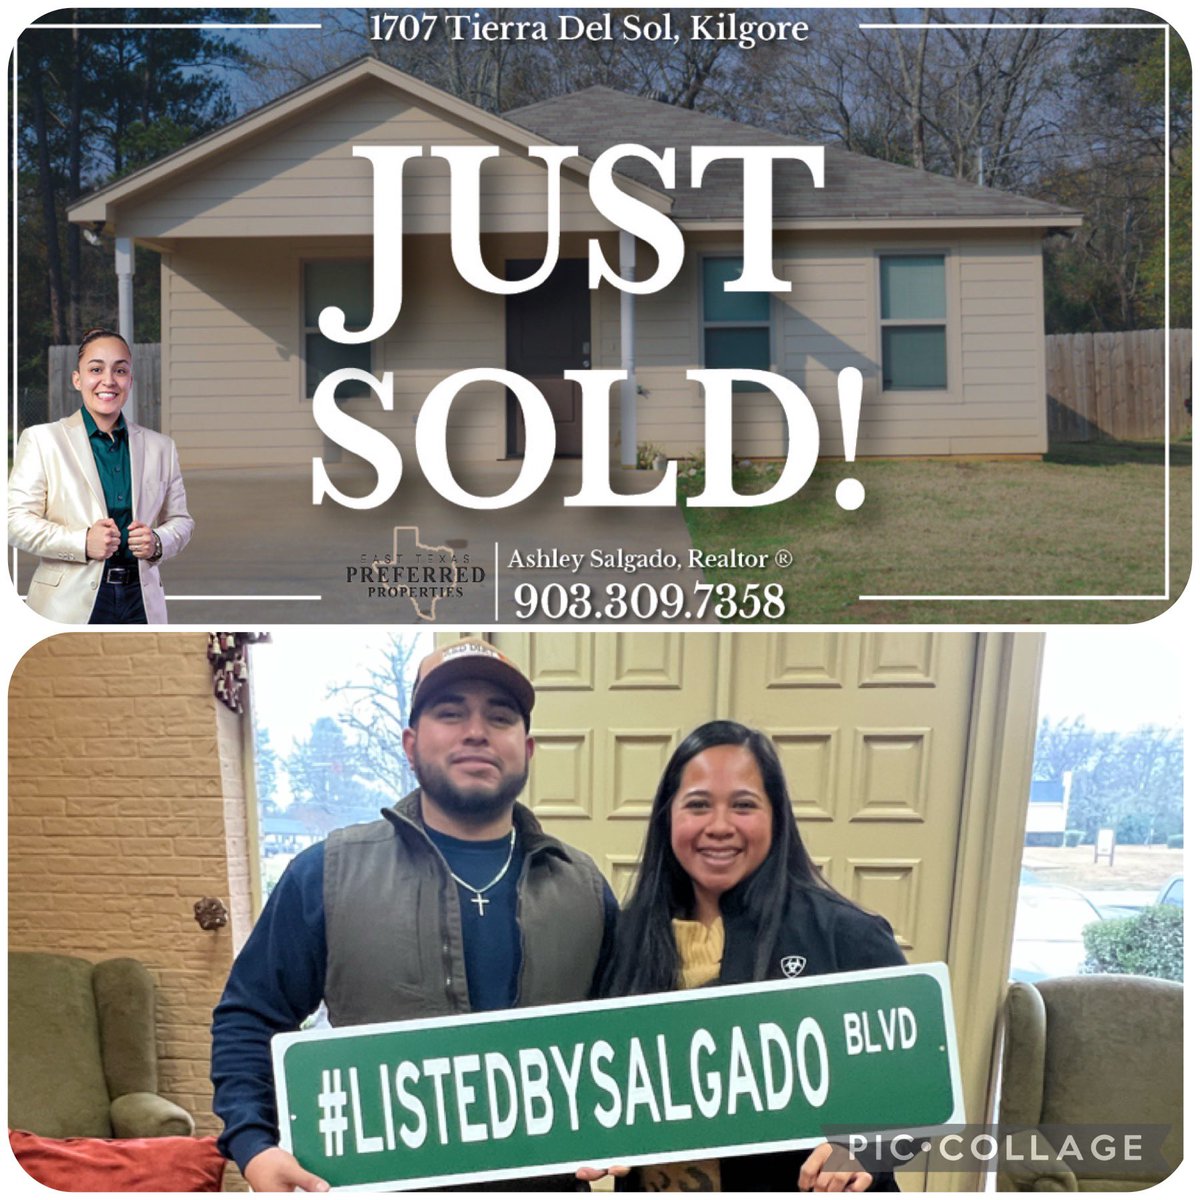 Congratulations to my sellers!

Thank you for trusting me Lisette and Mauricio. 

Wish you the best in your future endeavors. 

#AshleySalgadoTheRealtor #ListedBySalgado  #VeteranRealtor #EastTexasRealtor #MarineRealtor #homeseller #EastTexasRealEstate #KilgoreTexas